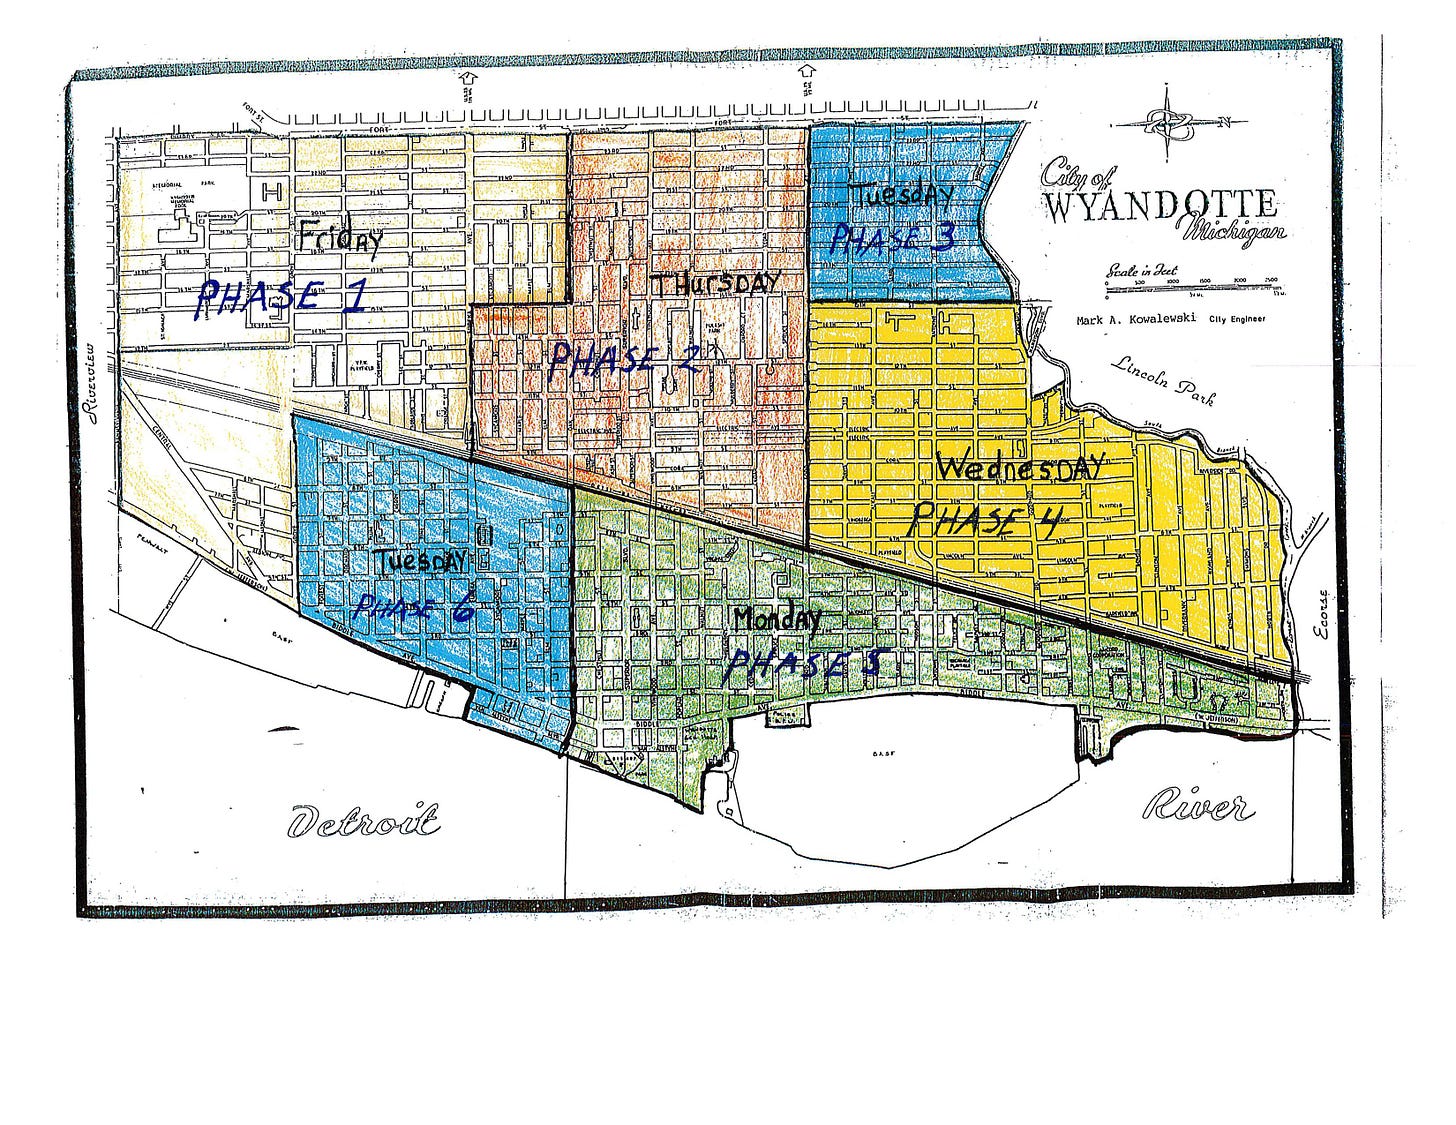 Visual of Wyandotte's Street Sweeping Phases, described below. Sweeping begins on the Southern end of the City and proceeds clockwise (north and east), ending with segments along the river.